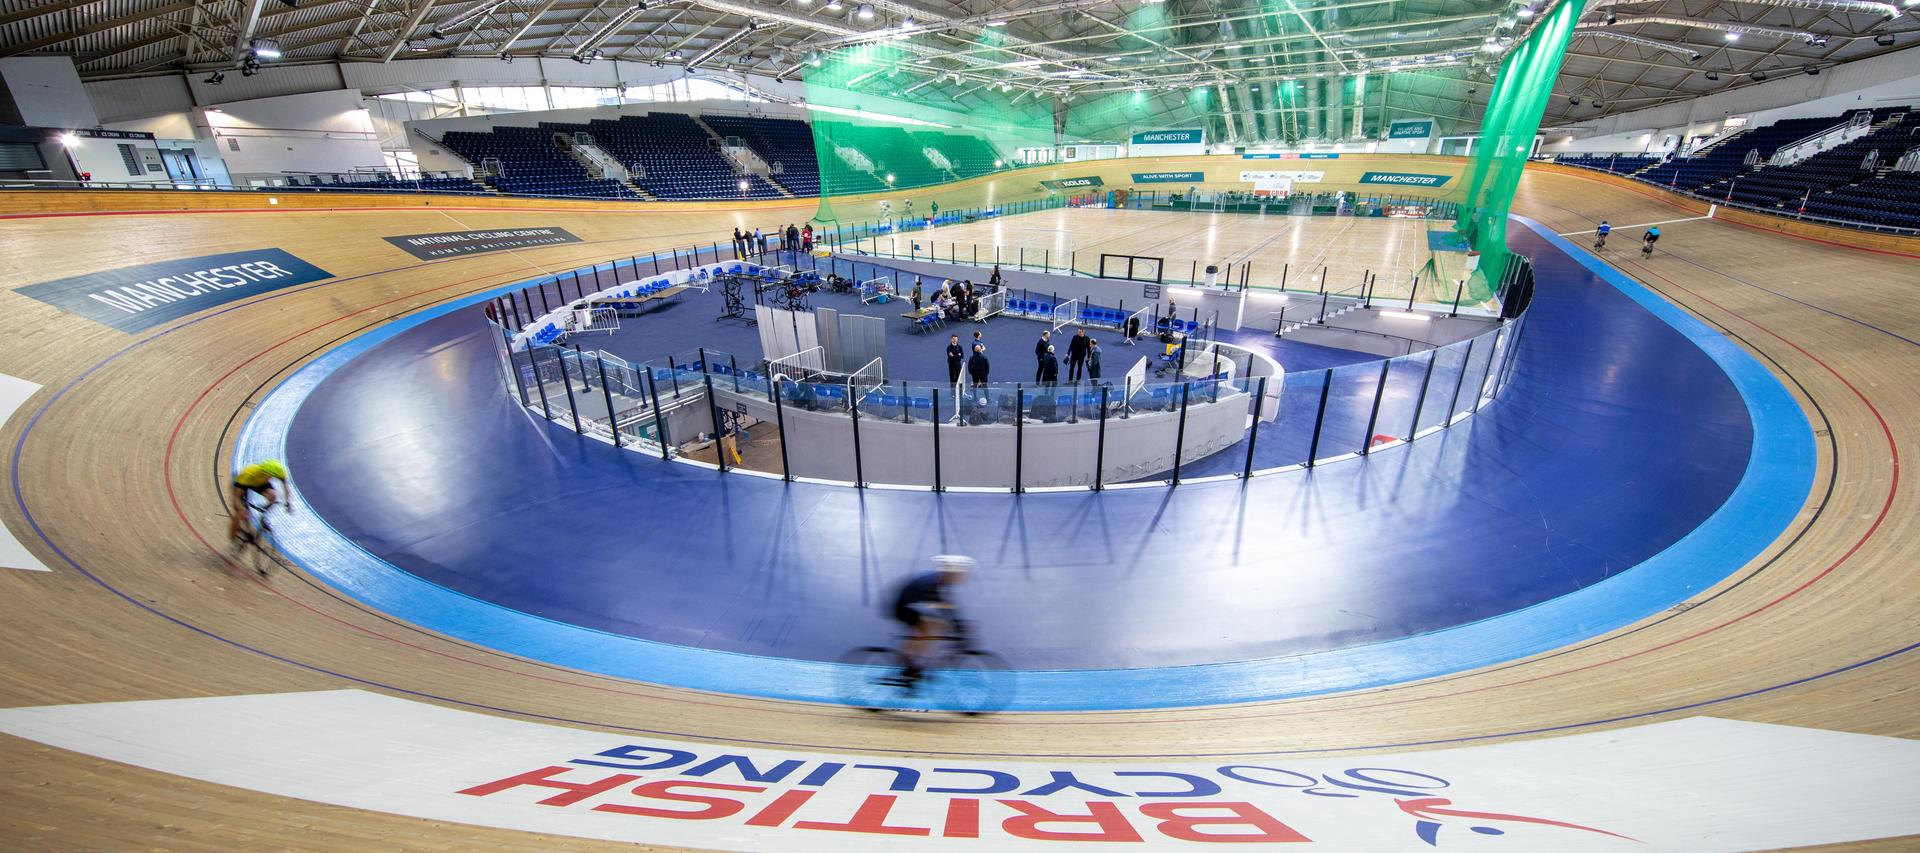 The national cycling centre track in use